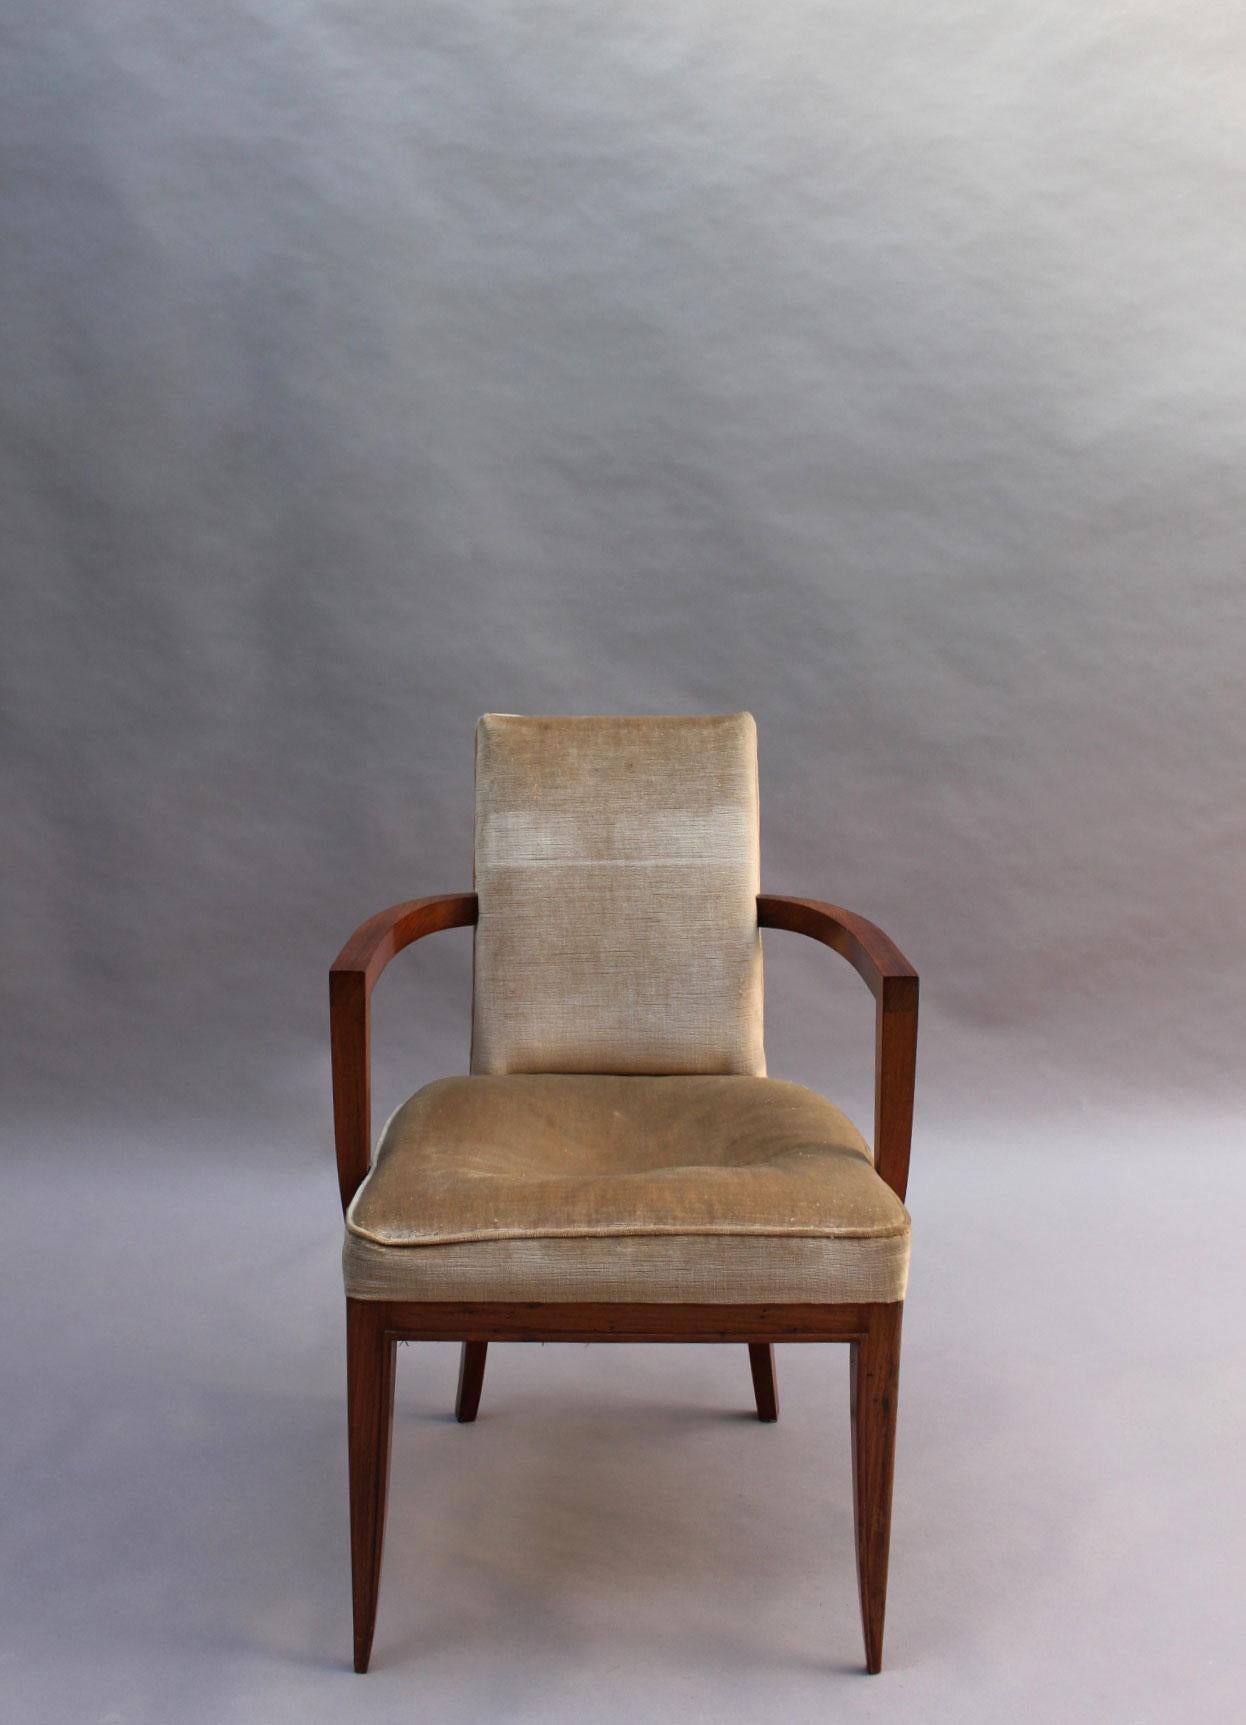 Maxime Old (1910-1991): A fine French Art Deco rosewood armchair with a flat molding highlighting the shape of the frame.
Measure: Arm height is 25.75 in.
 